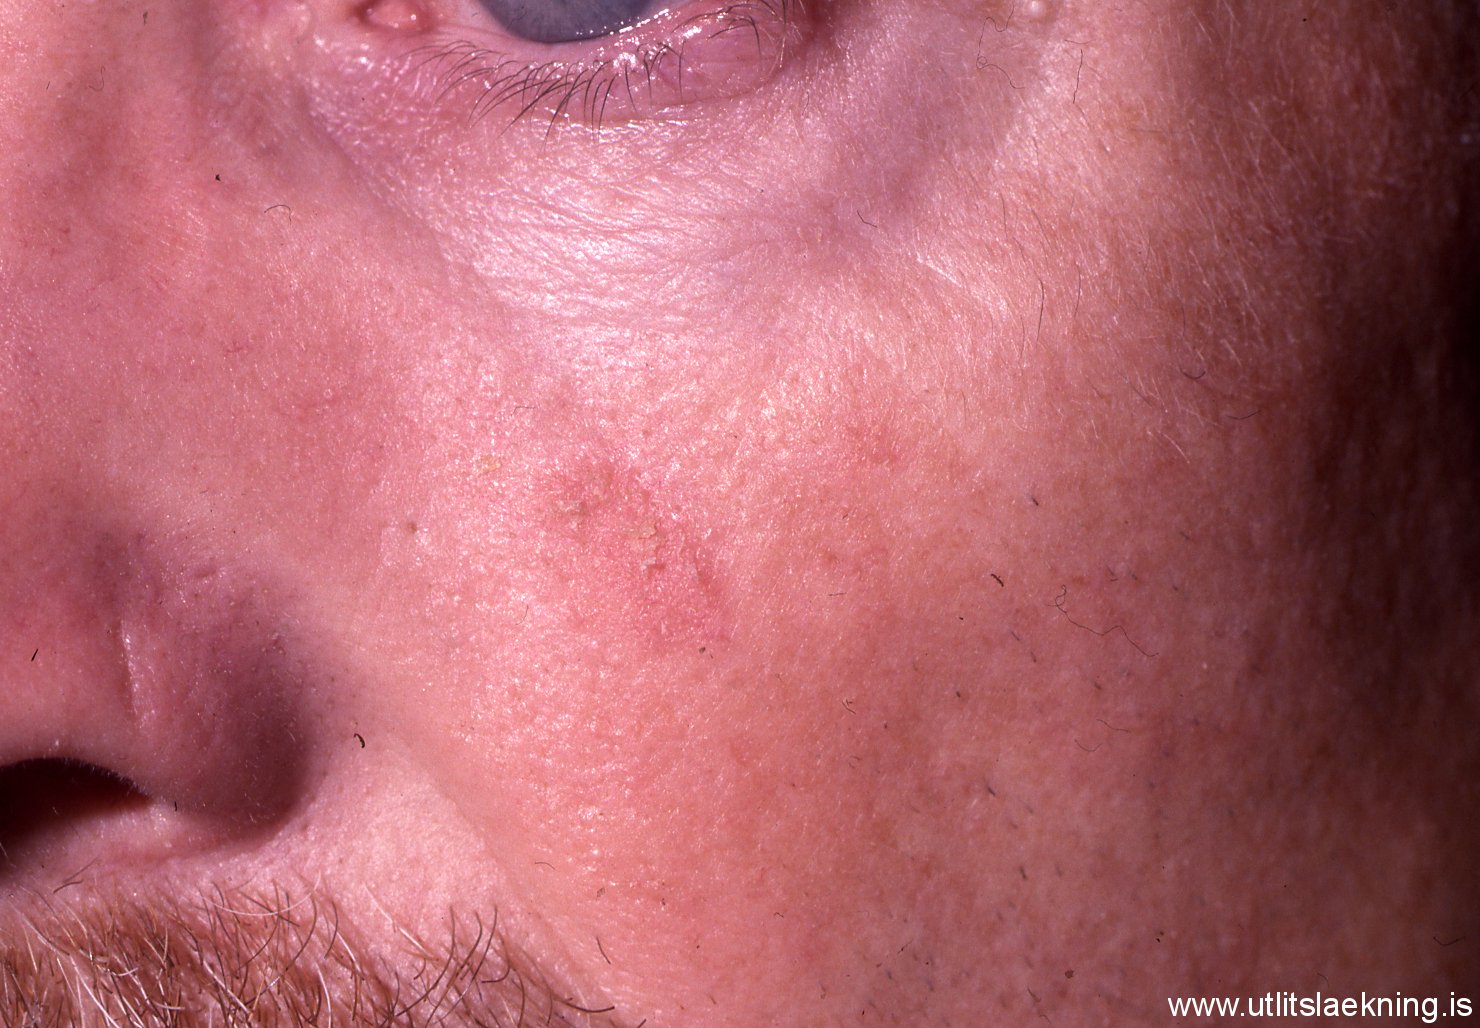 Actinic Keratosis Pictures and Photos